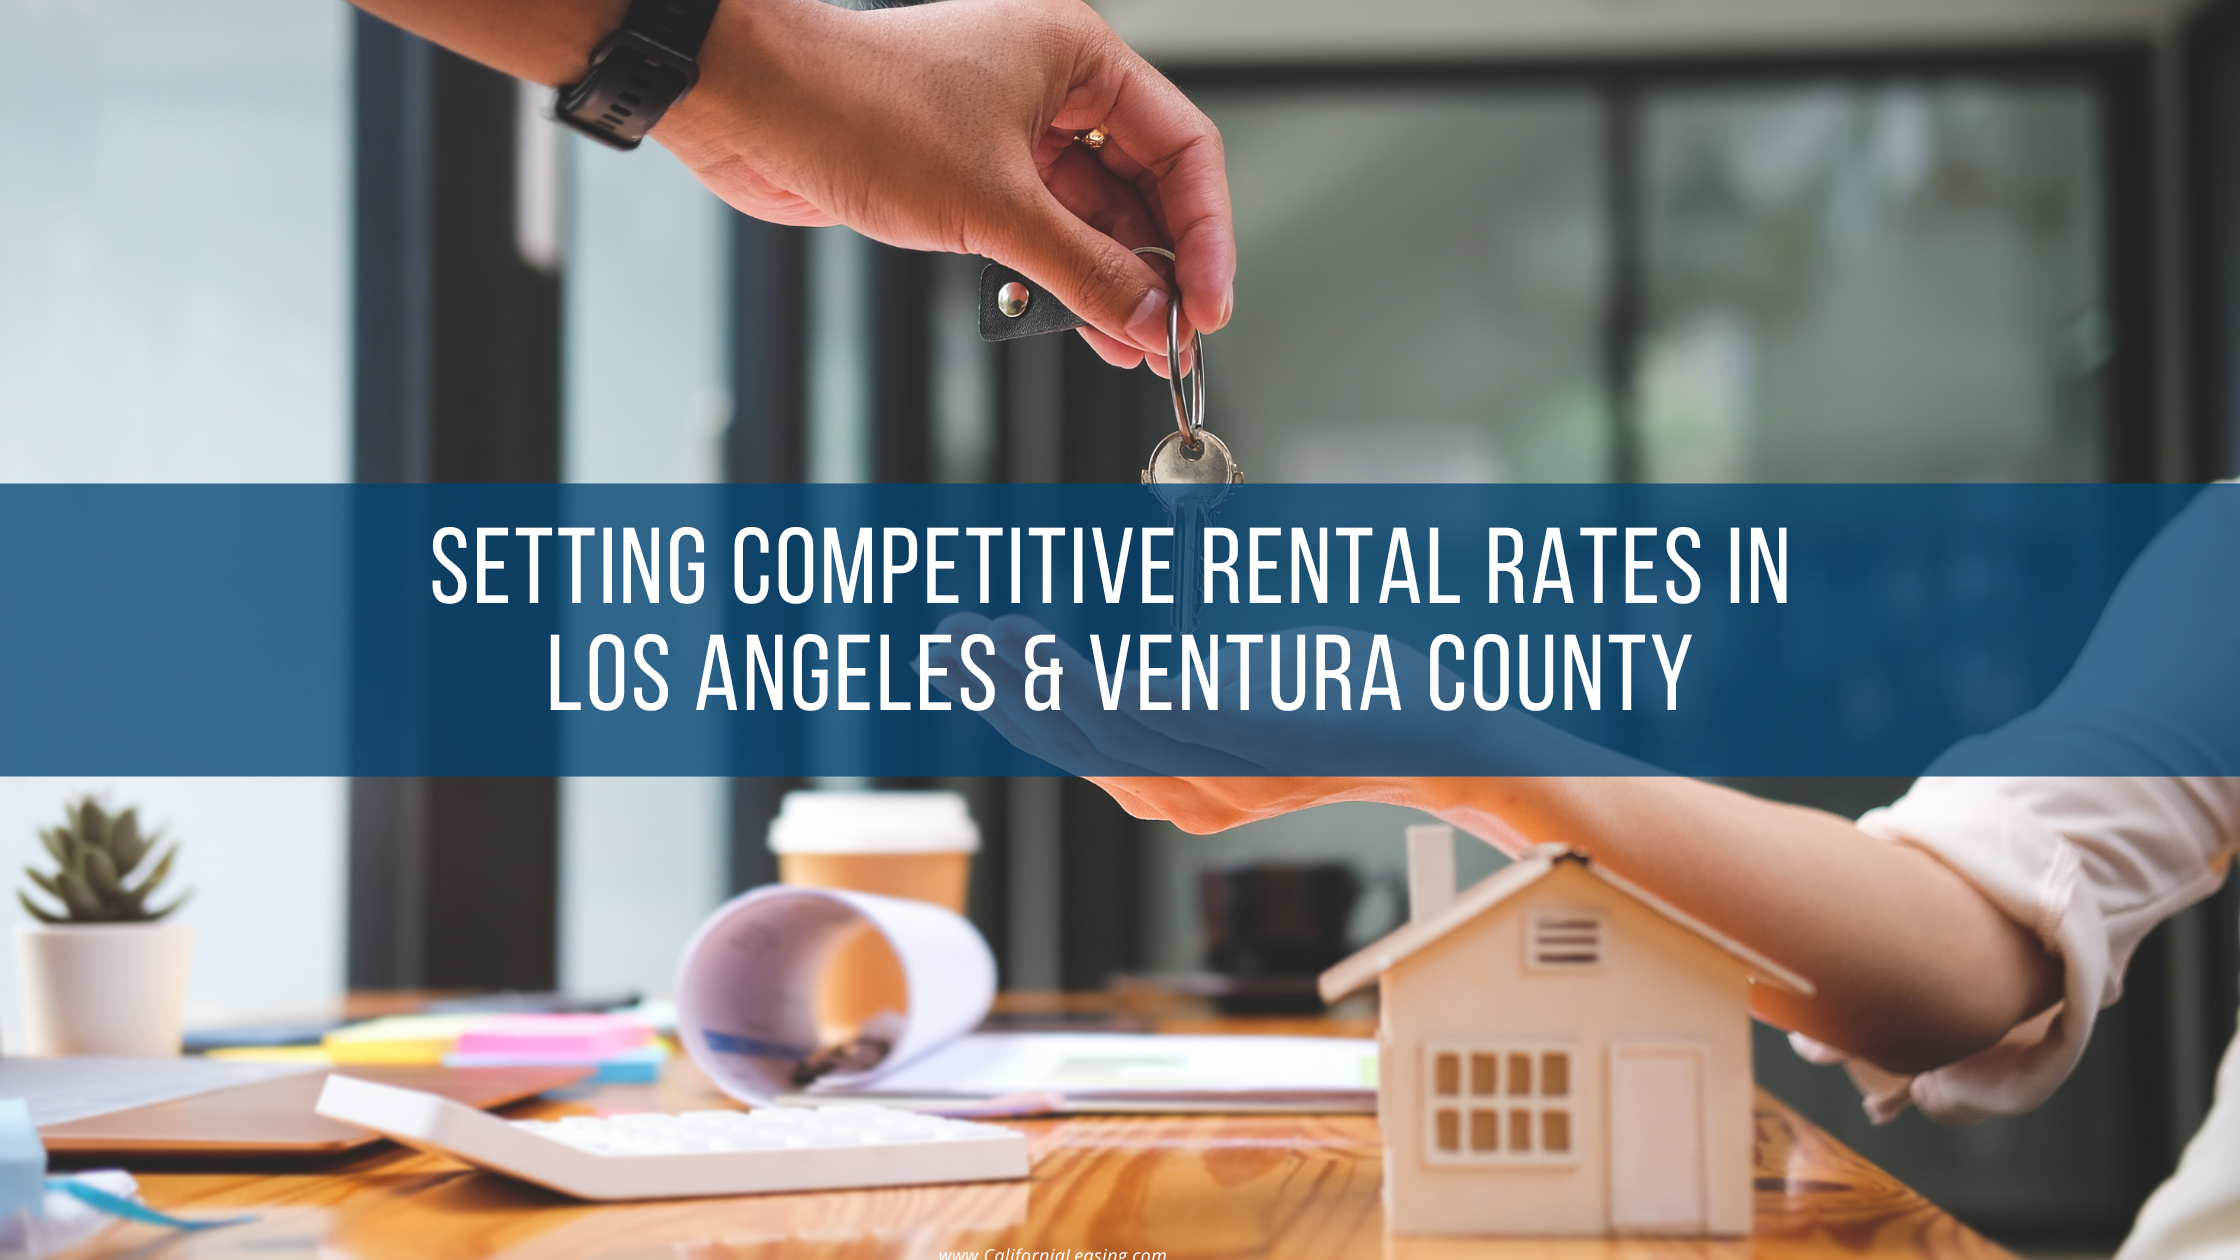 Setting Competitive Rental Rates in Los Angeles & Ventura County blog post on the california leasing property management website